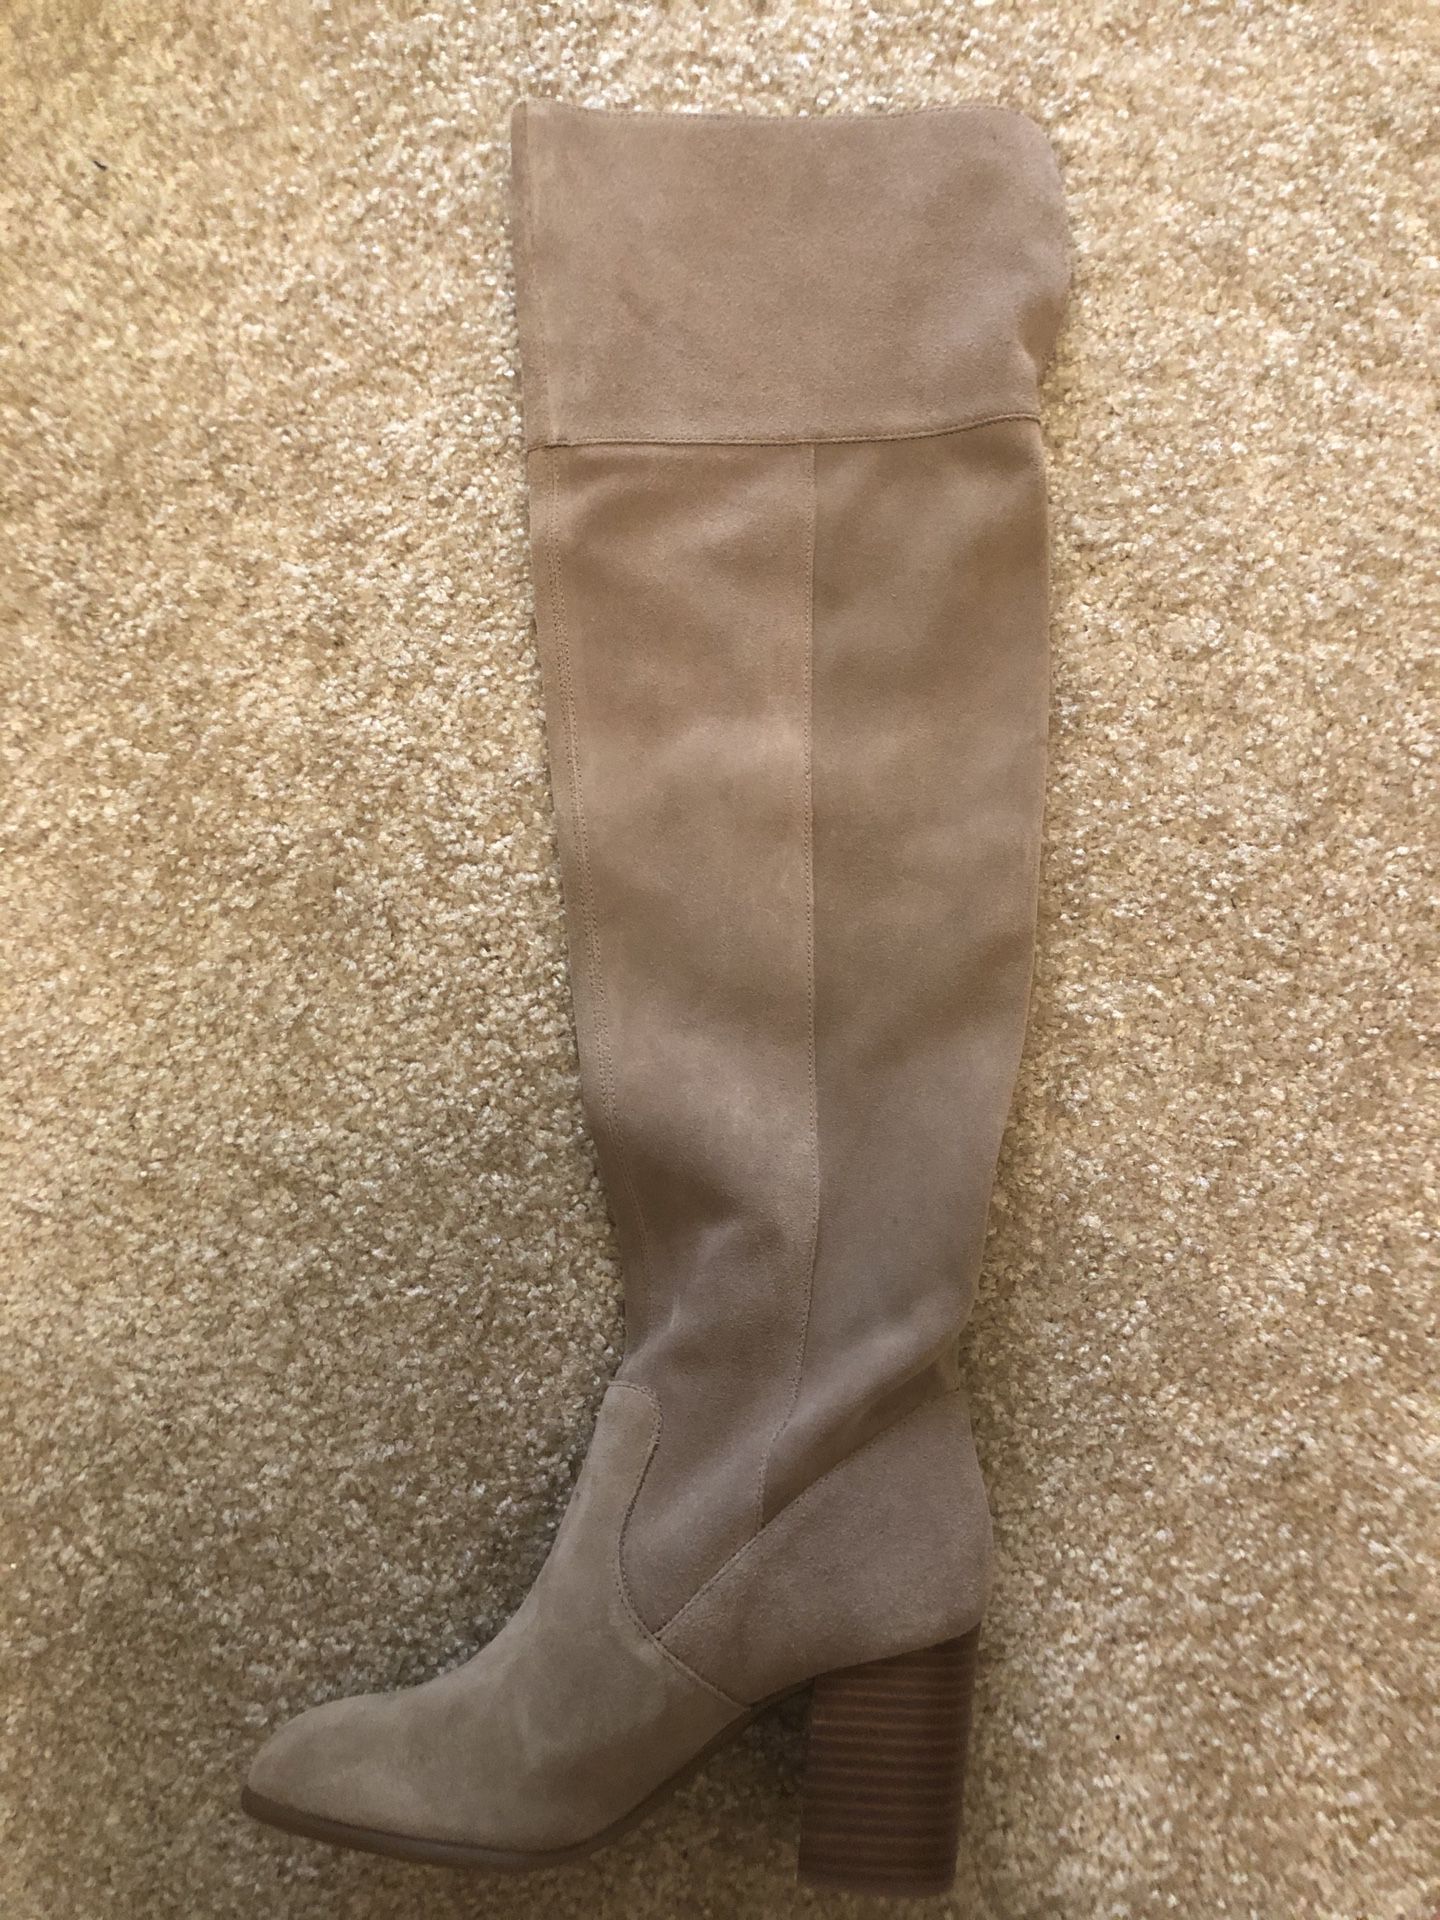 Jessica Simpson Suede Thigh High Boots